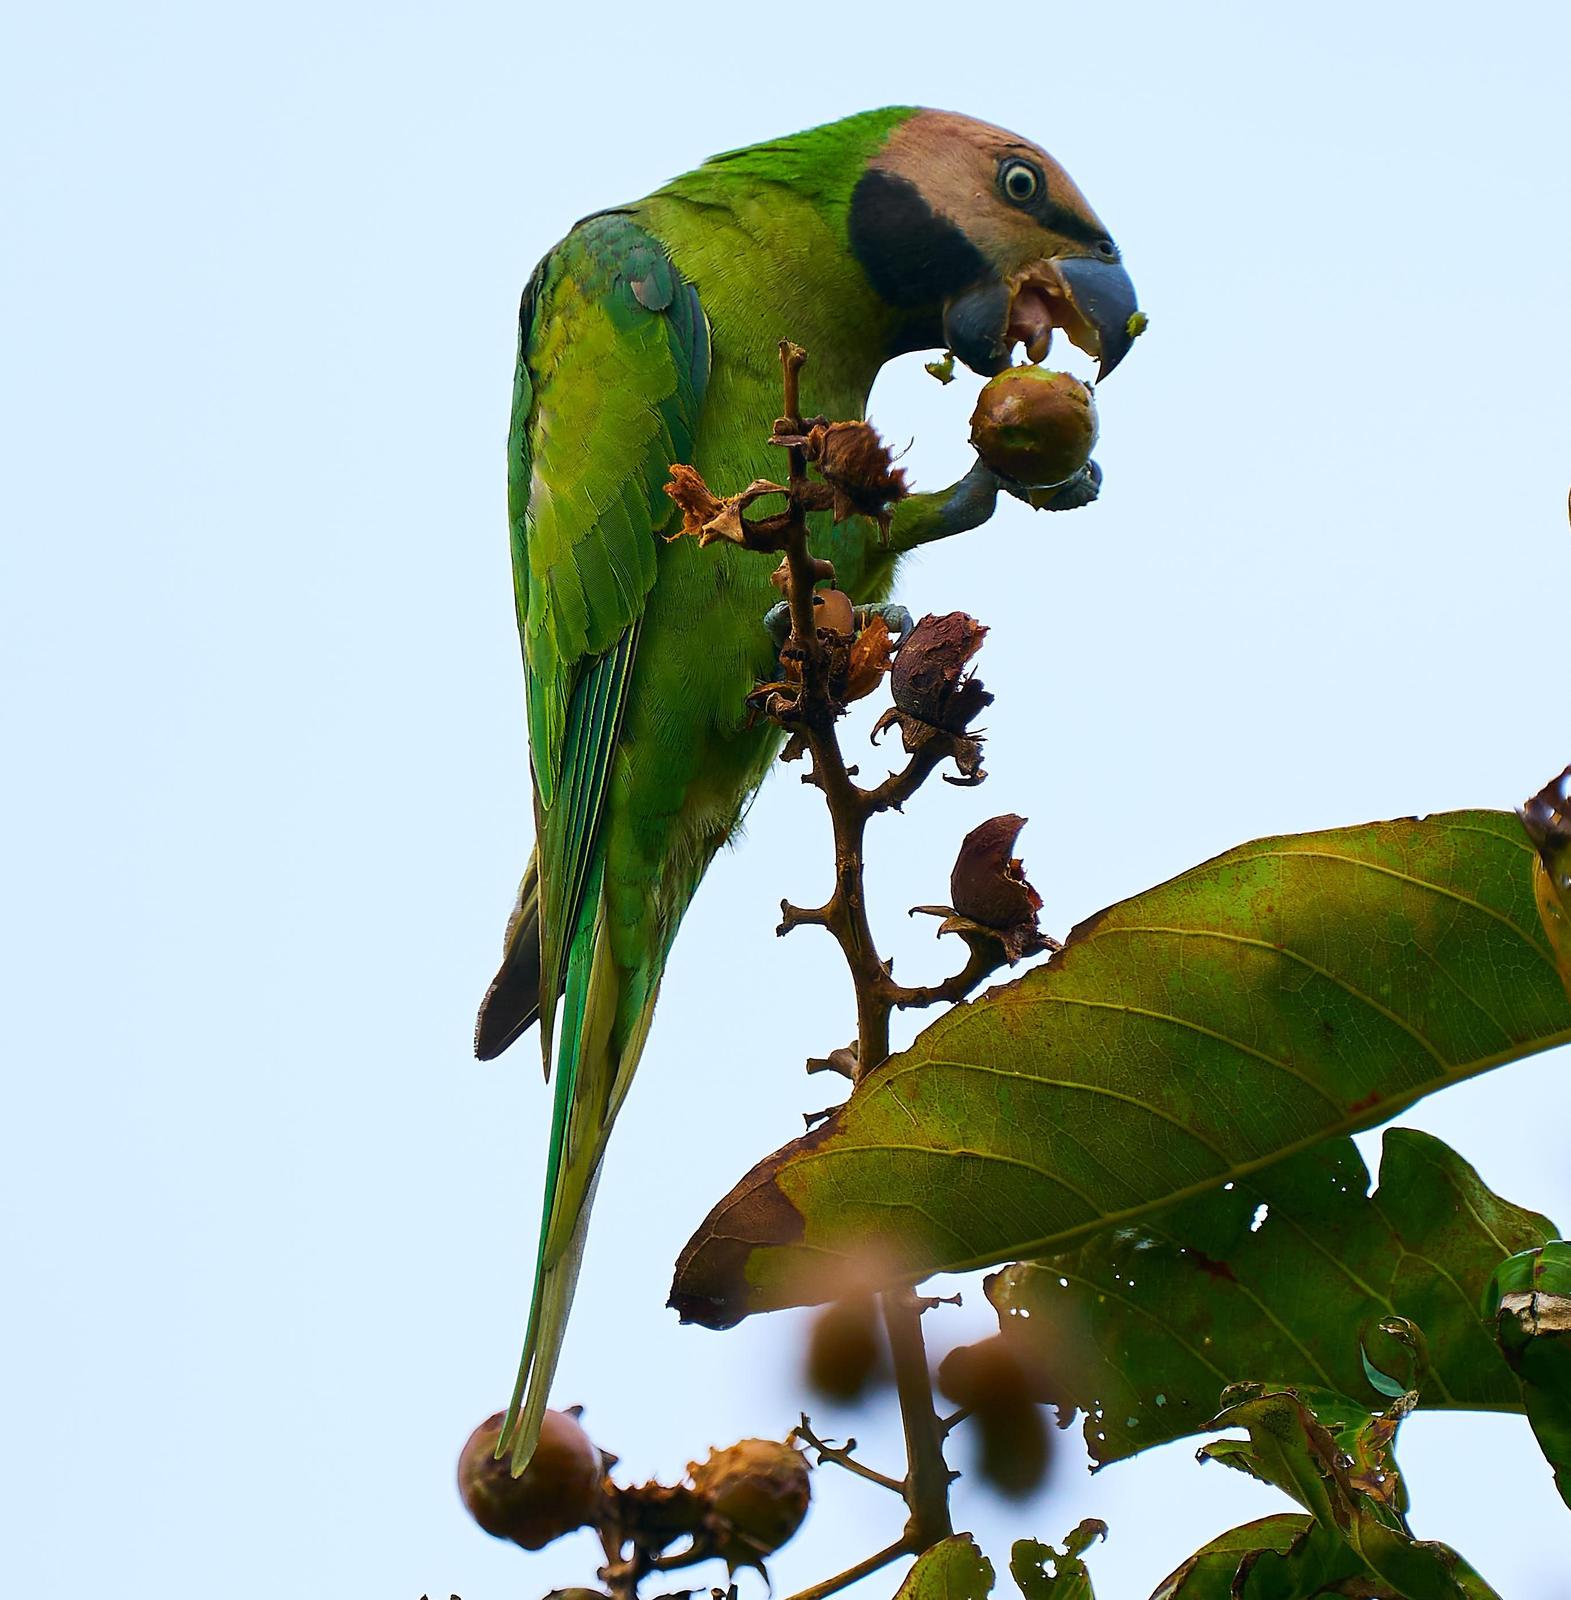 Long-tailed Parakeet Photo by Steven Cheong